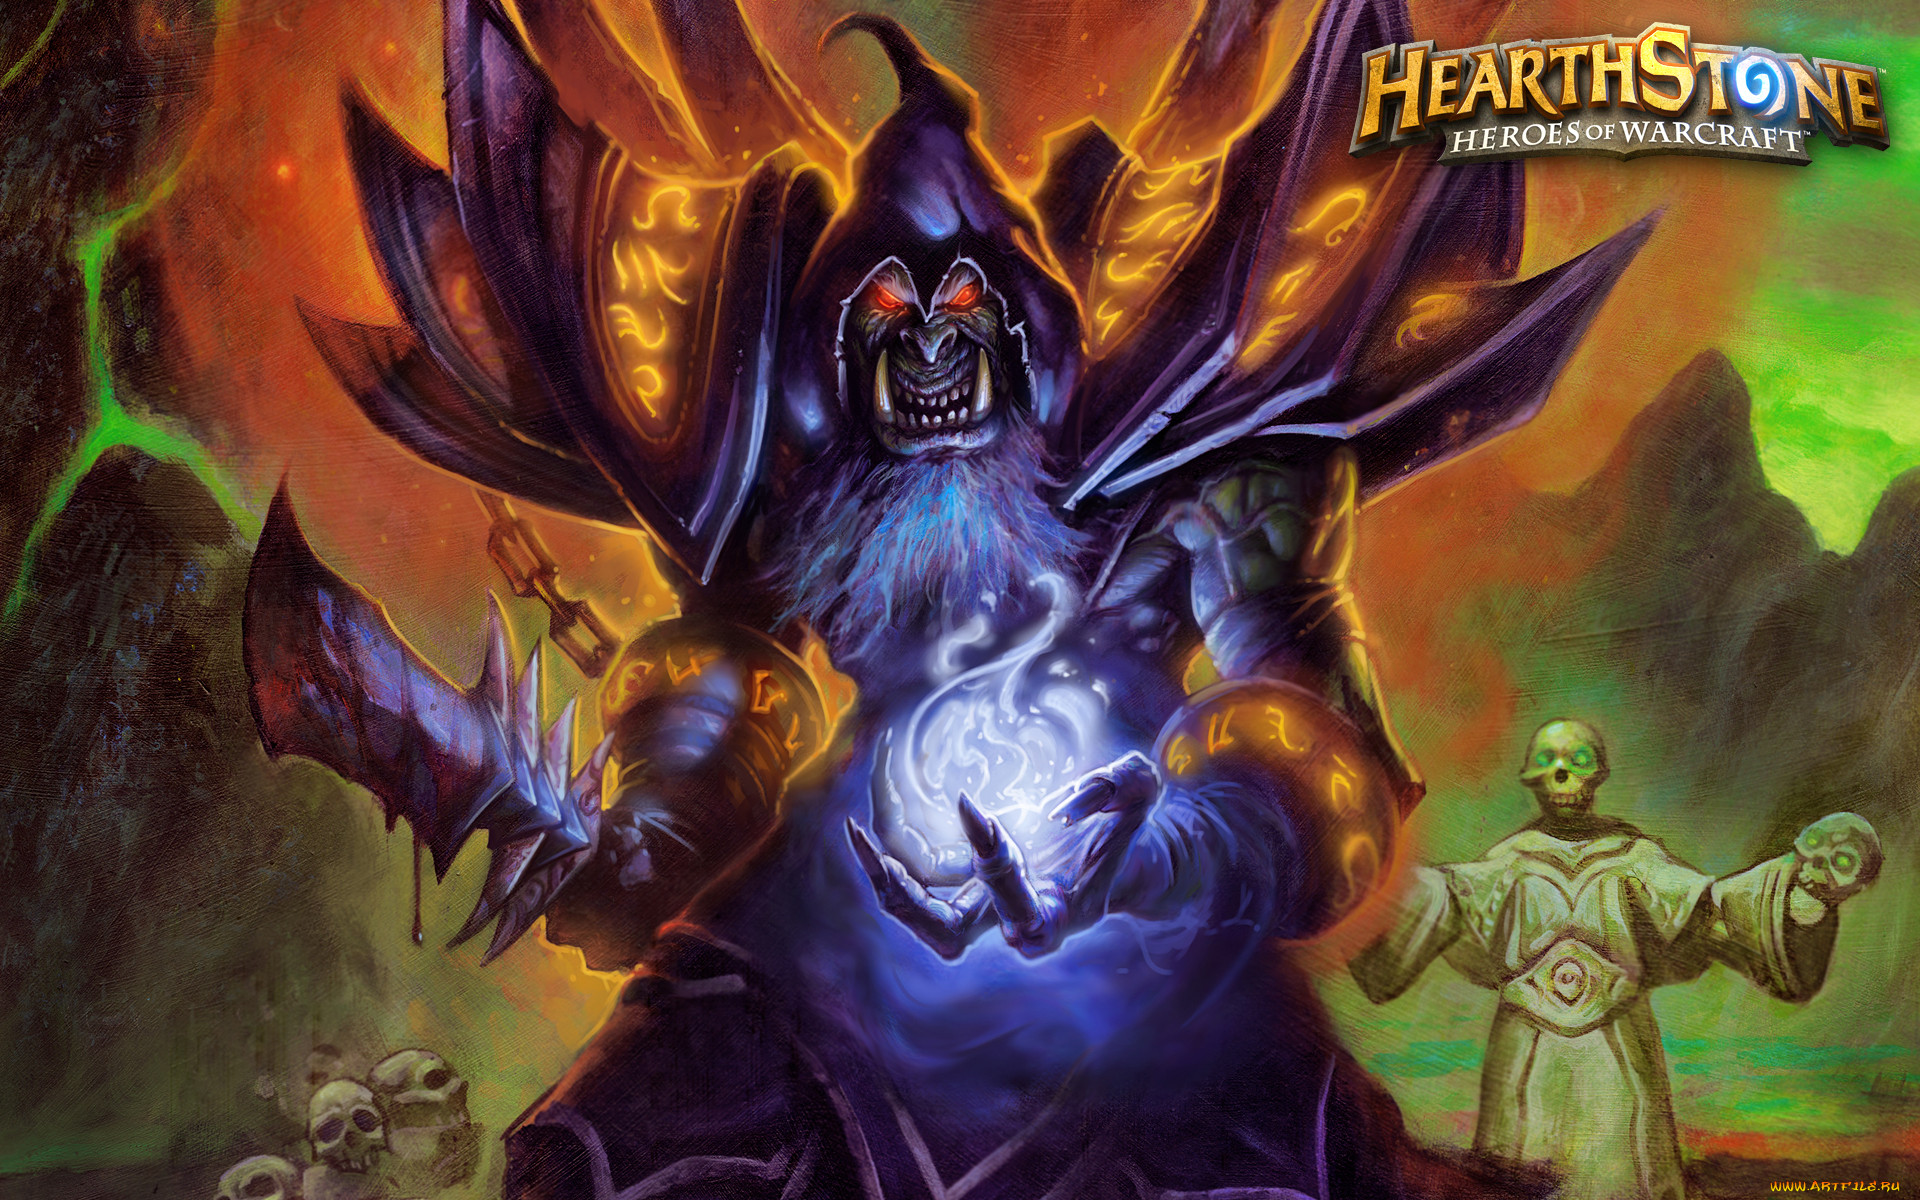  , hearthstone,  heroes of warcraft, , action, , heroes, of, warcraft